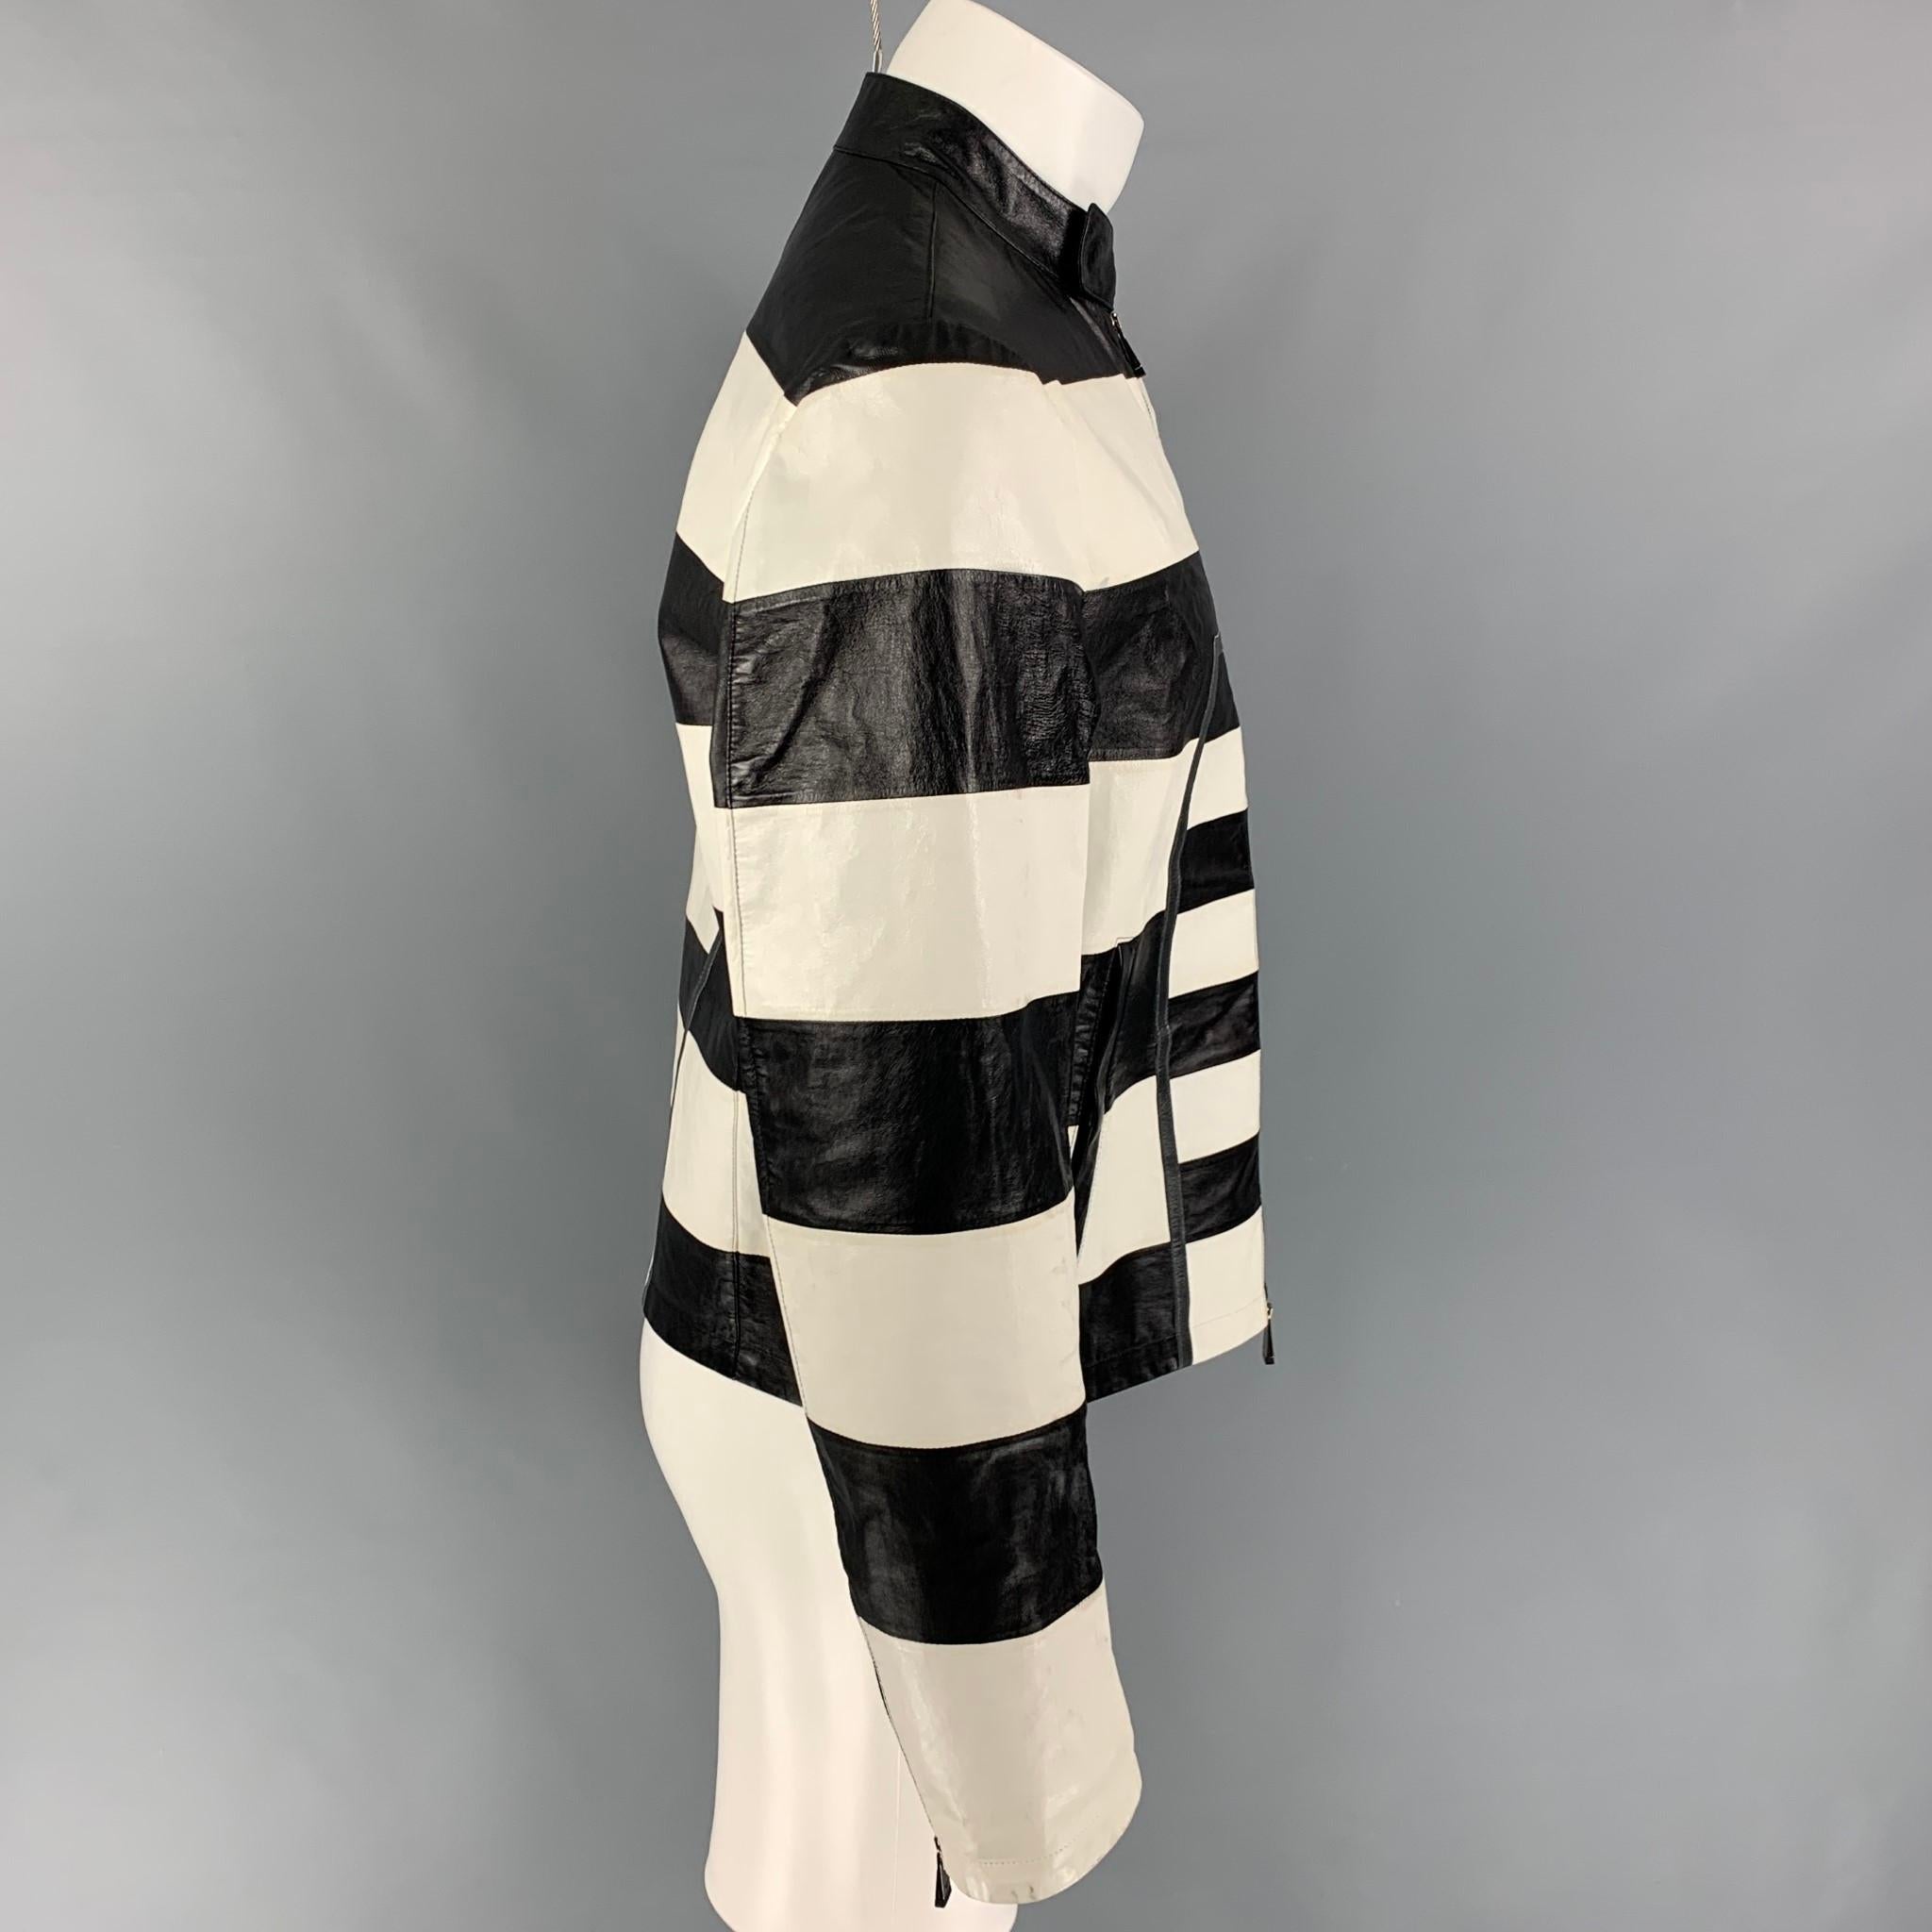 EMPORIO ARMANI jacket comes in a black & white stripe lamb skin leather featuring a snap button collar, zipped sleeves, front pockets, and a full zip up closure. Made in Italy. 

Very Good Pre-Owned Condition.
Marked: 50

Measurements:

Shoulder: 18